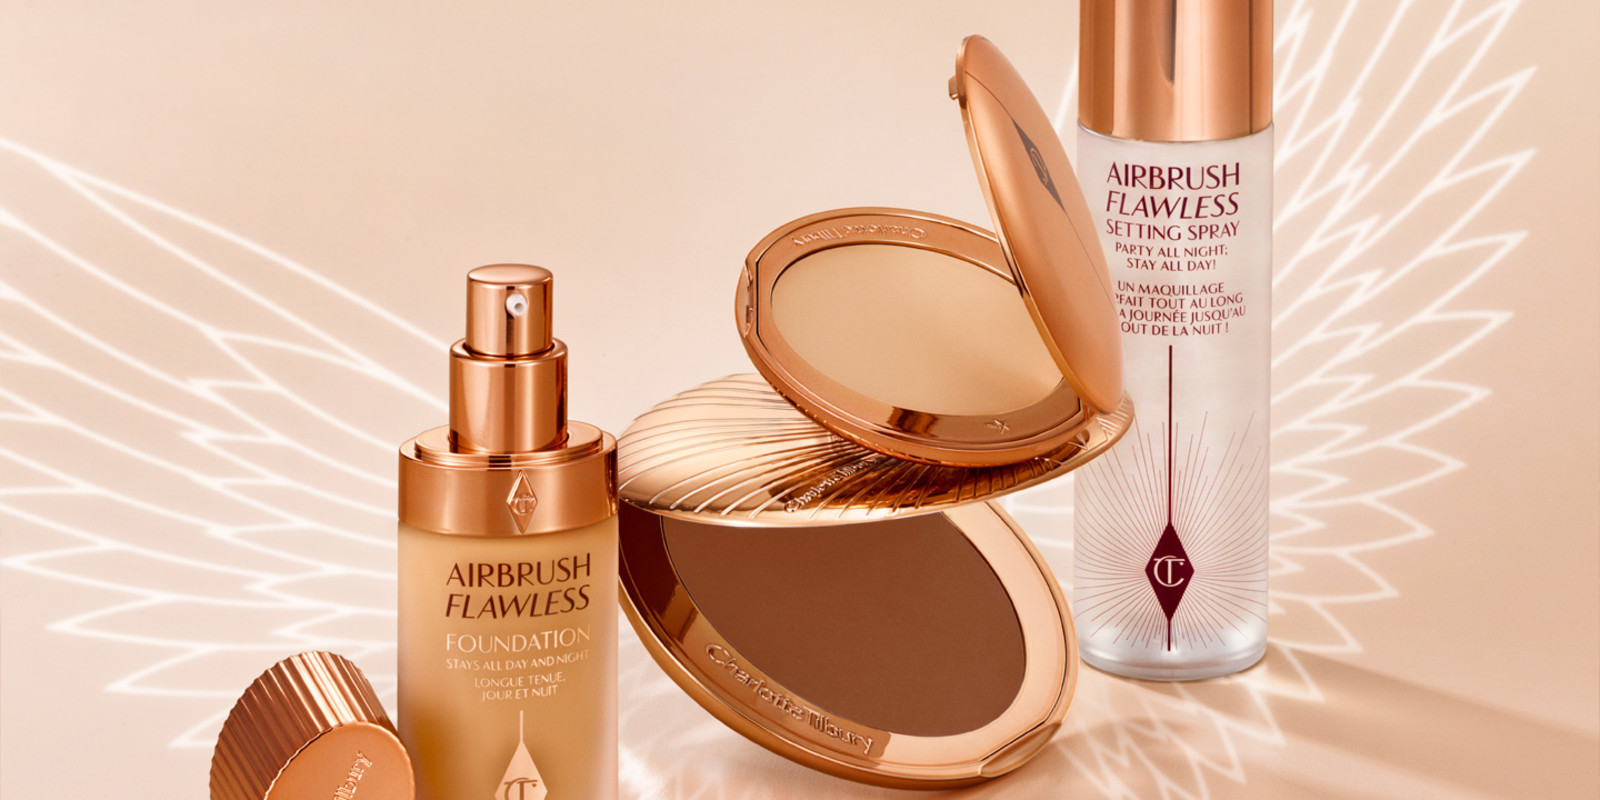 An open pressed powder compact in a light beige shade with a foundation in a frosted glass bottle with gold-coloured lid, a setting spray in a clear bottle with a gold-coloured lid, and a bronzer compact in gold-coloured packaging.